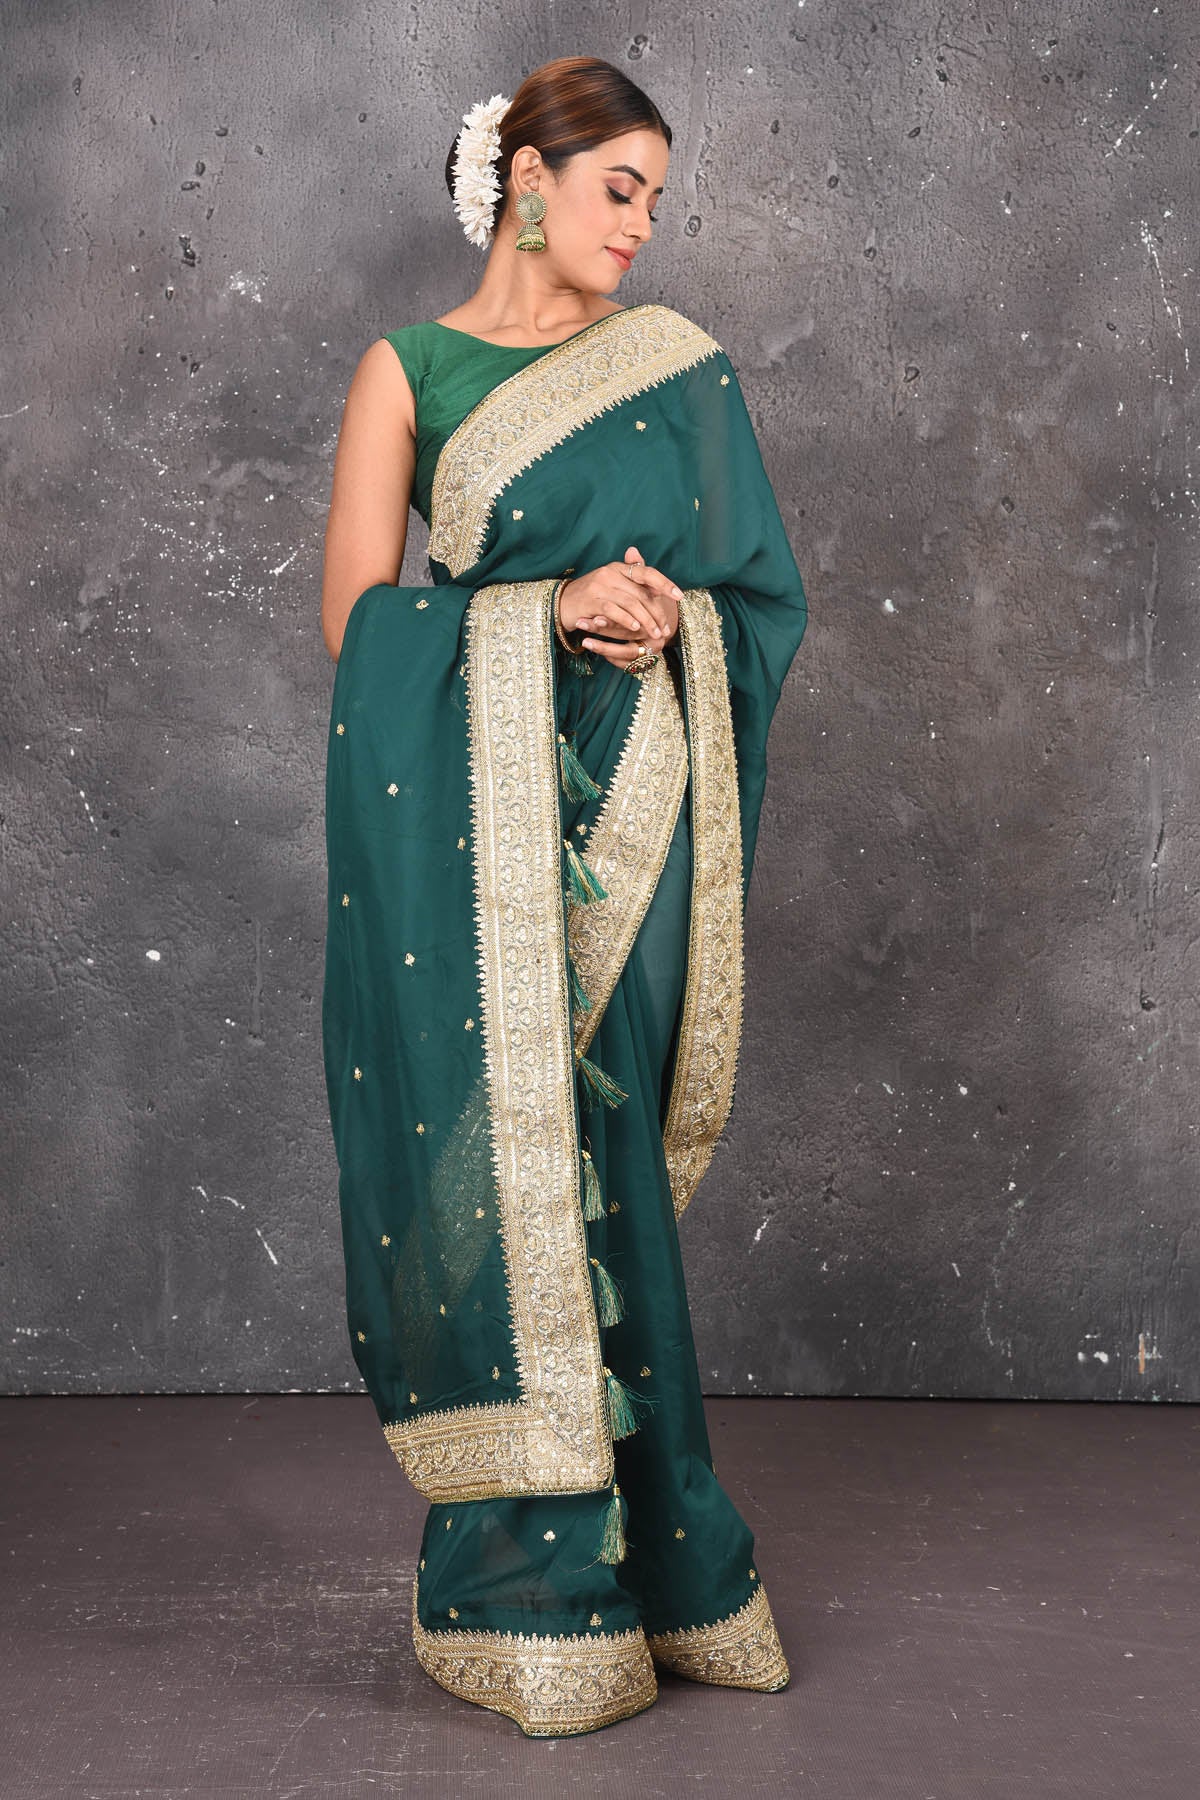 Buy exquisite pine green georgette banarasi designer saree with golden heavy Border online in USA which has crafted by skilled weaver of Banaras with elegance and grace, this saree is definitely the epitome of beauty and a must have in your collection. Buy designer handwoven banarasi georgette sari with any blouse from Pure Elegance Indian saree store in USA.-Front view.